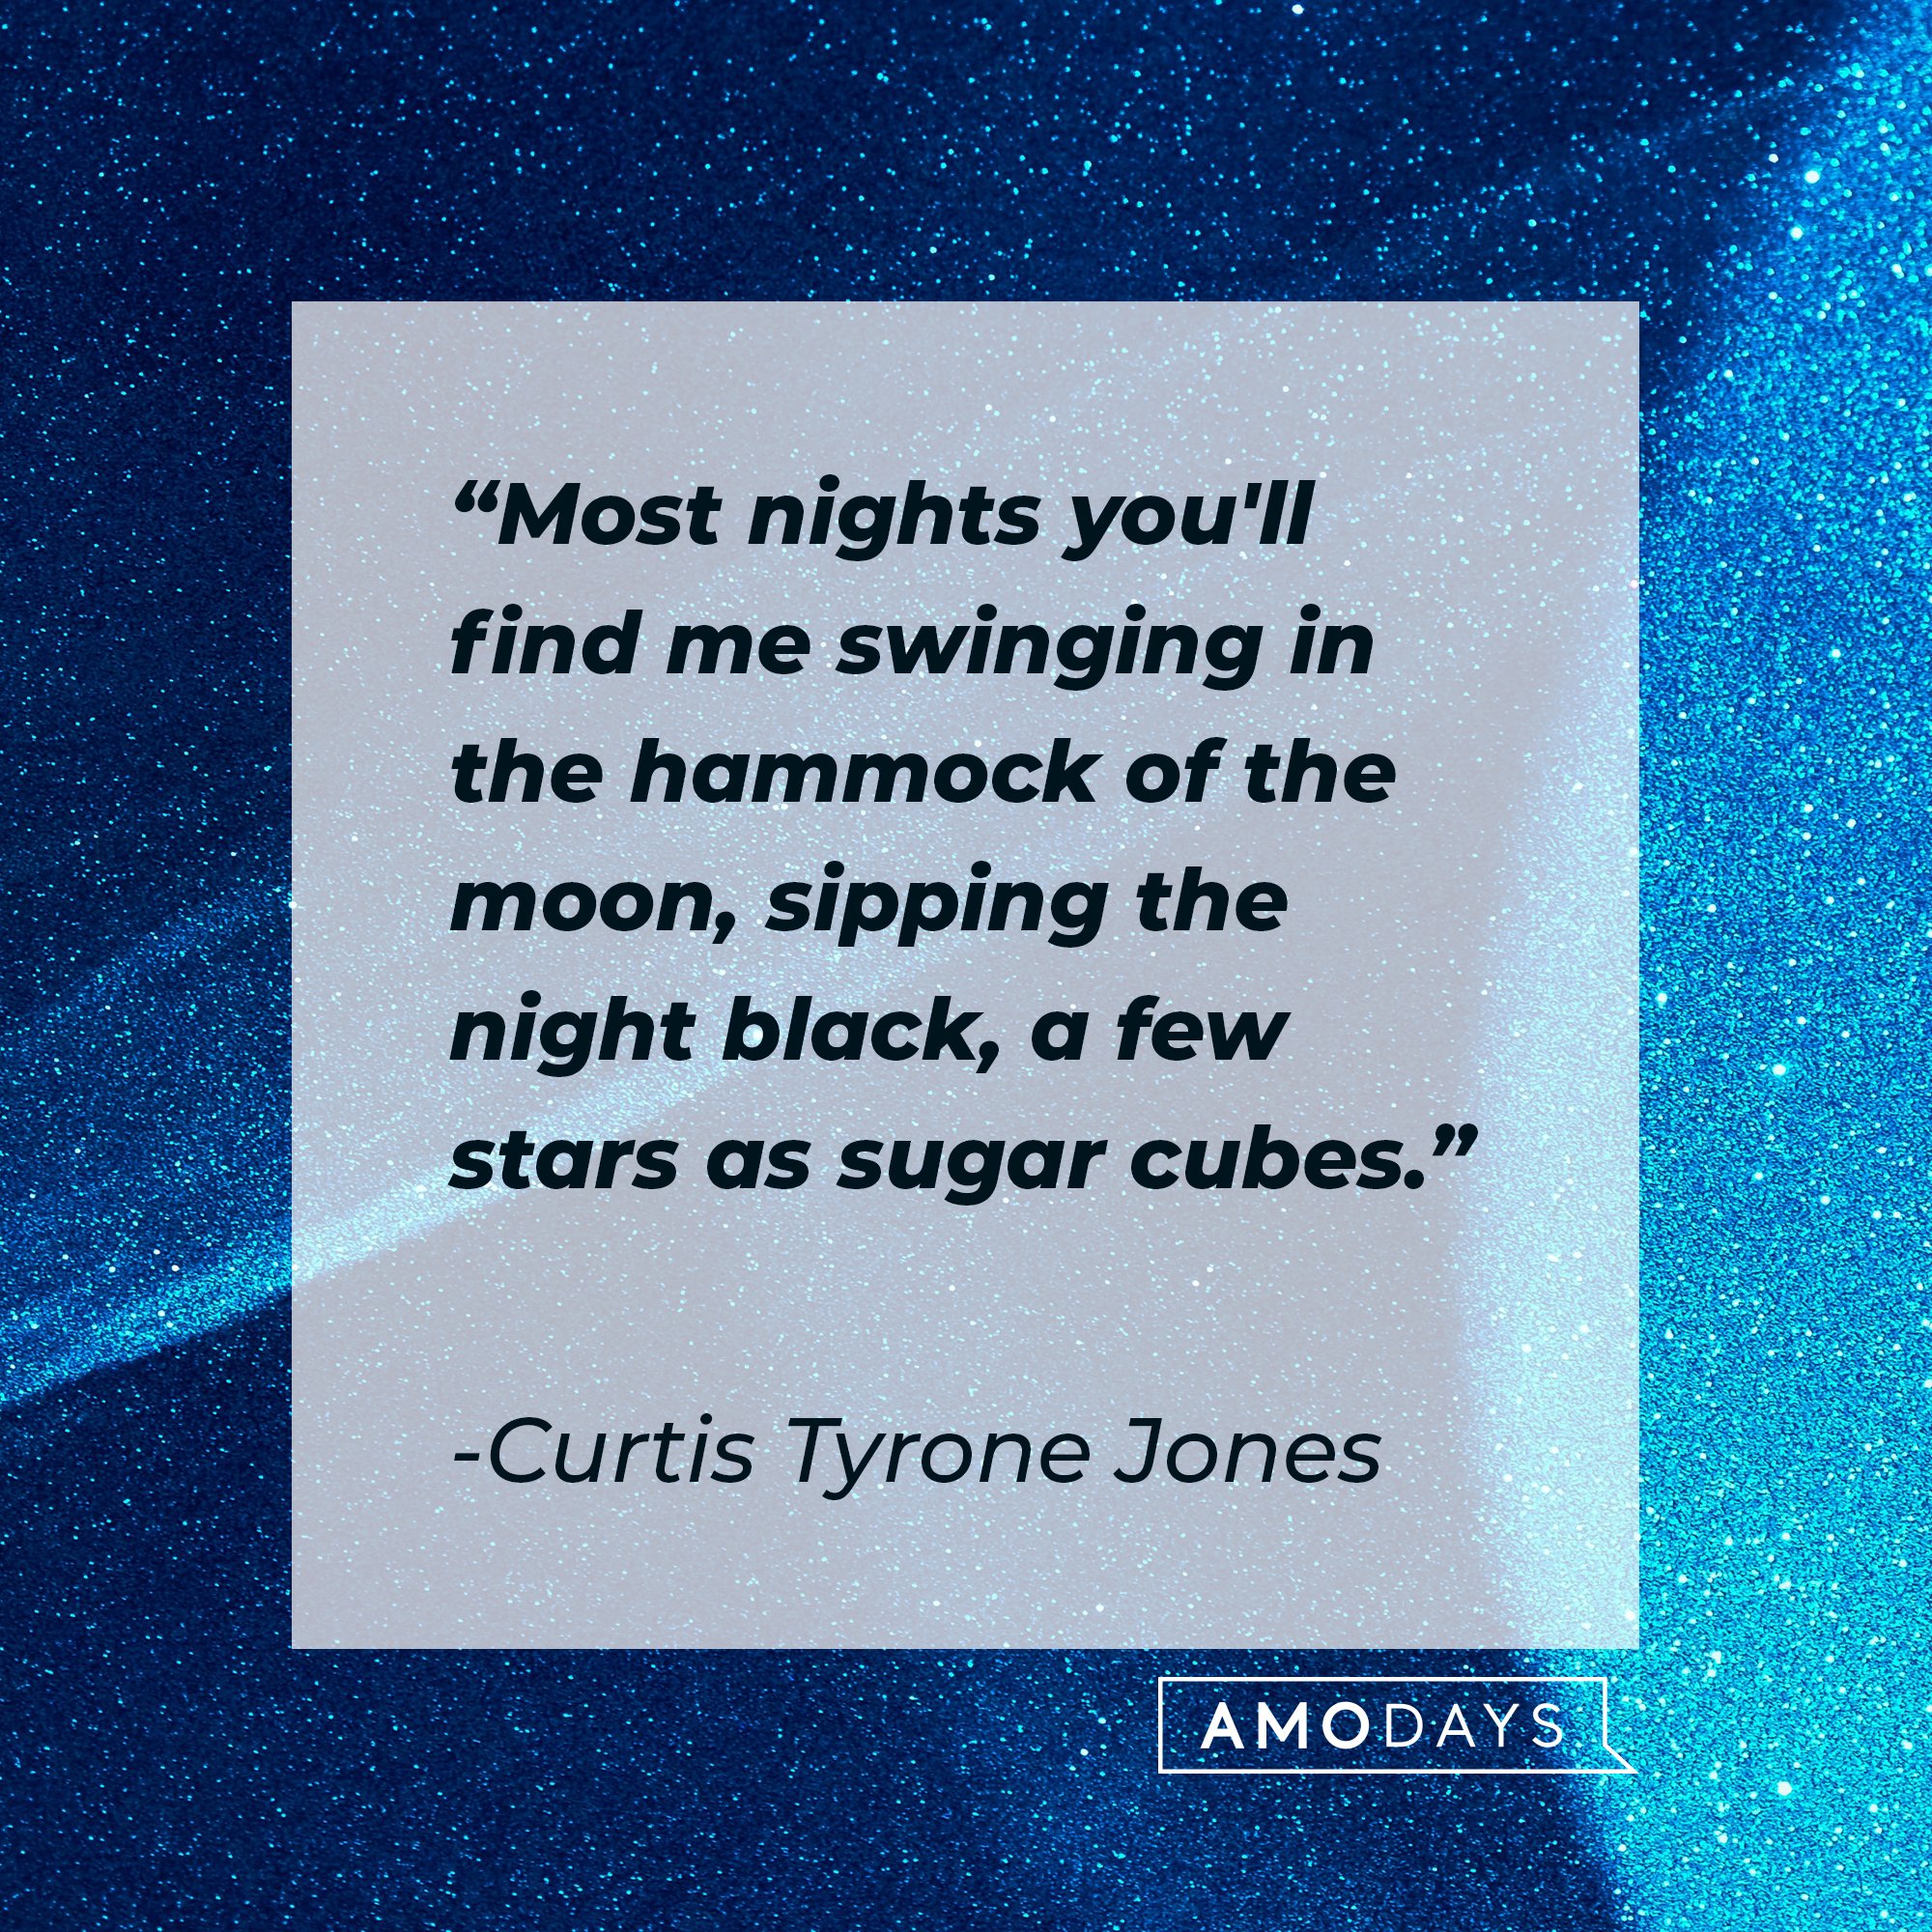 Curtis Tyrone Jones’s quote: "Most nights you'll find me swinging in the hammock of the moon, sipping the night black, a few stars as sugar cubes." | Image: AmoDays